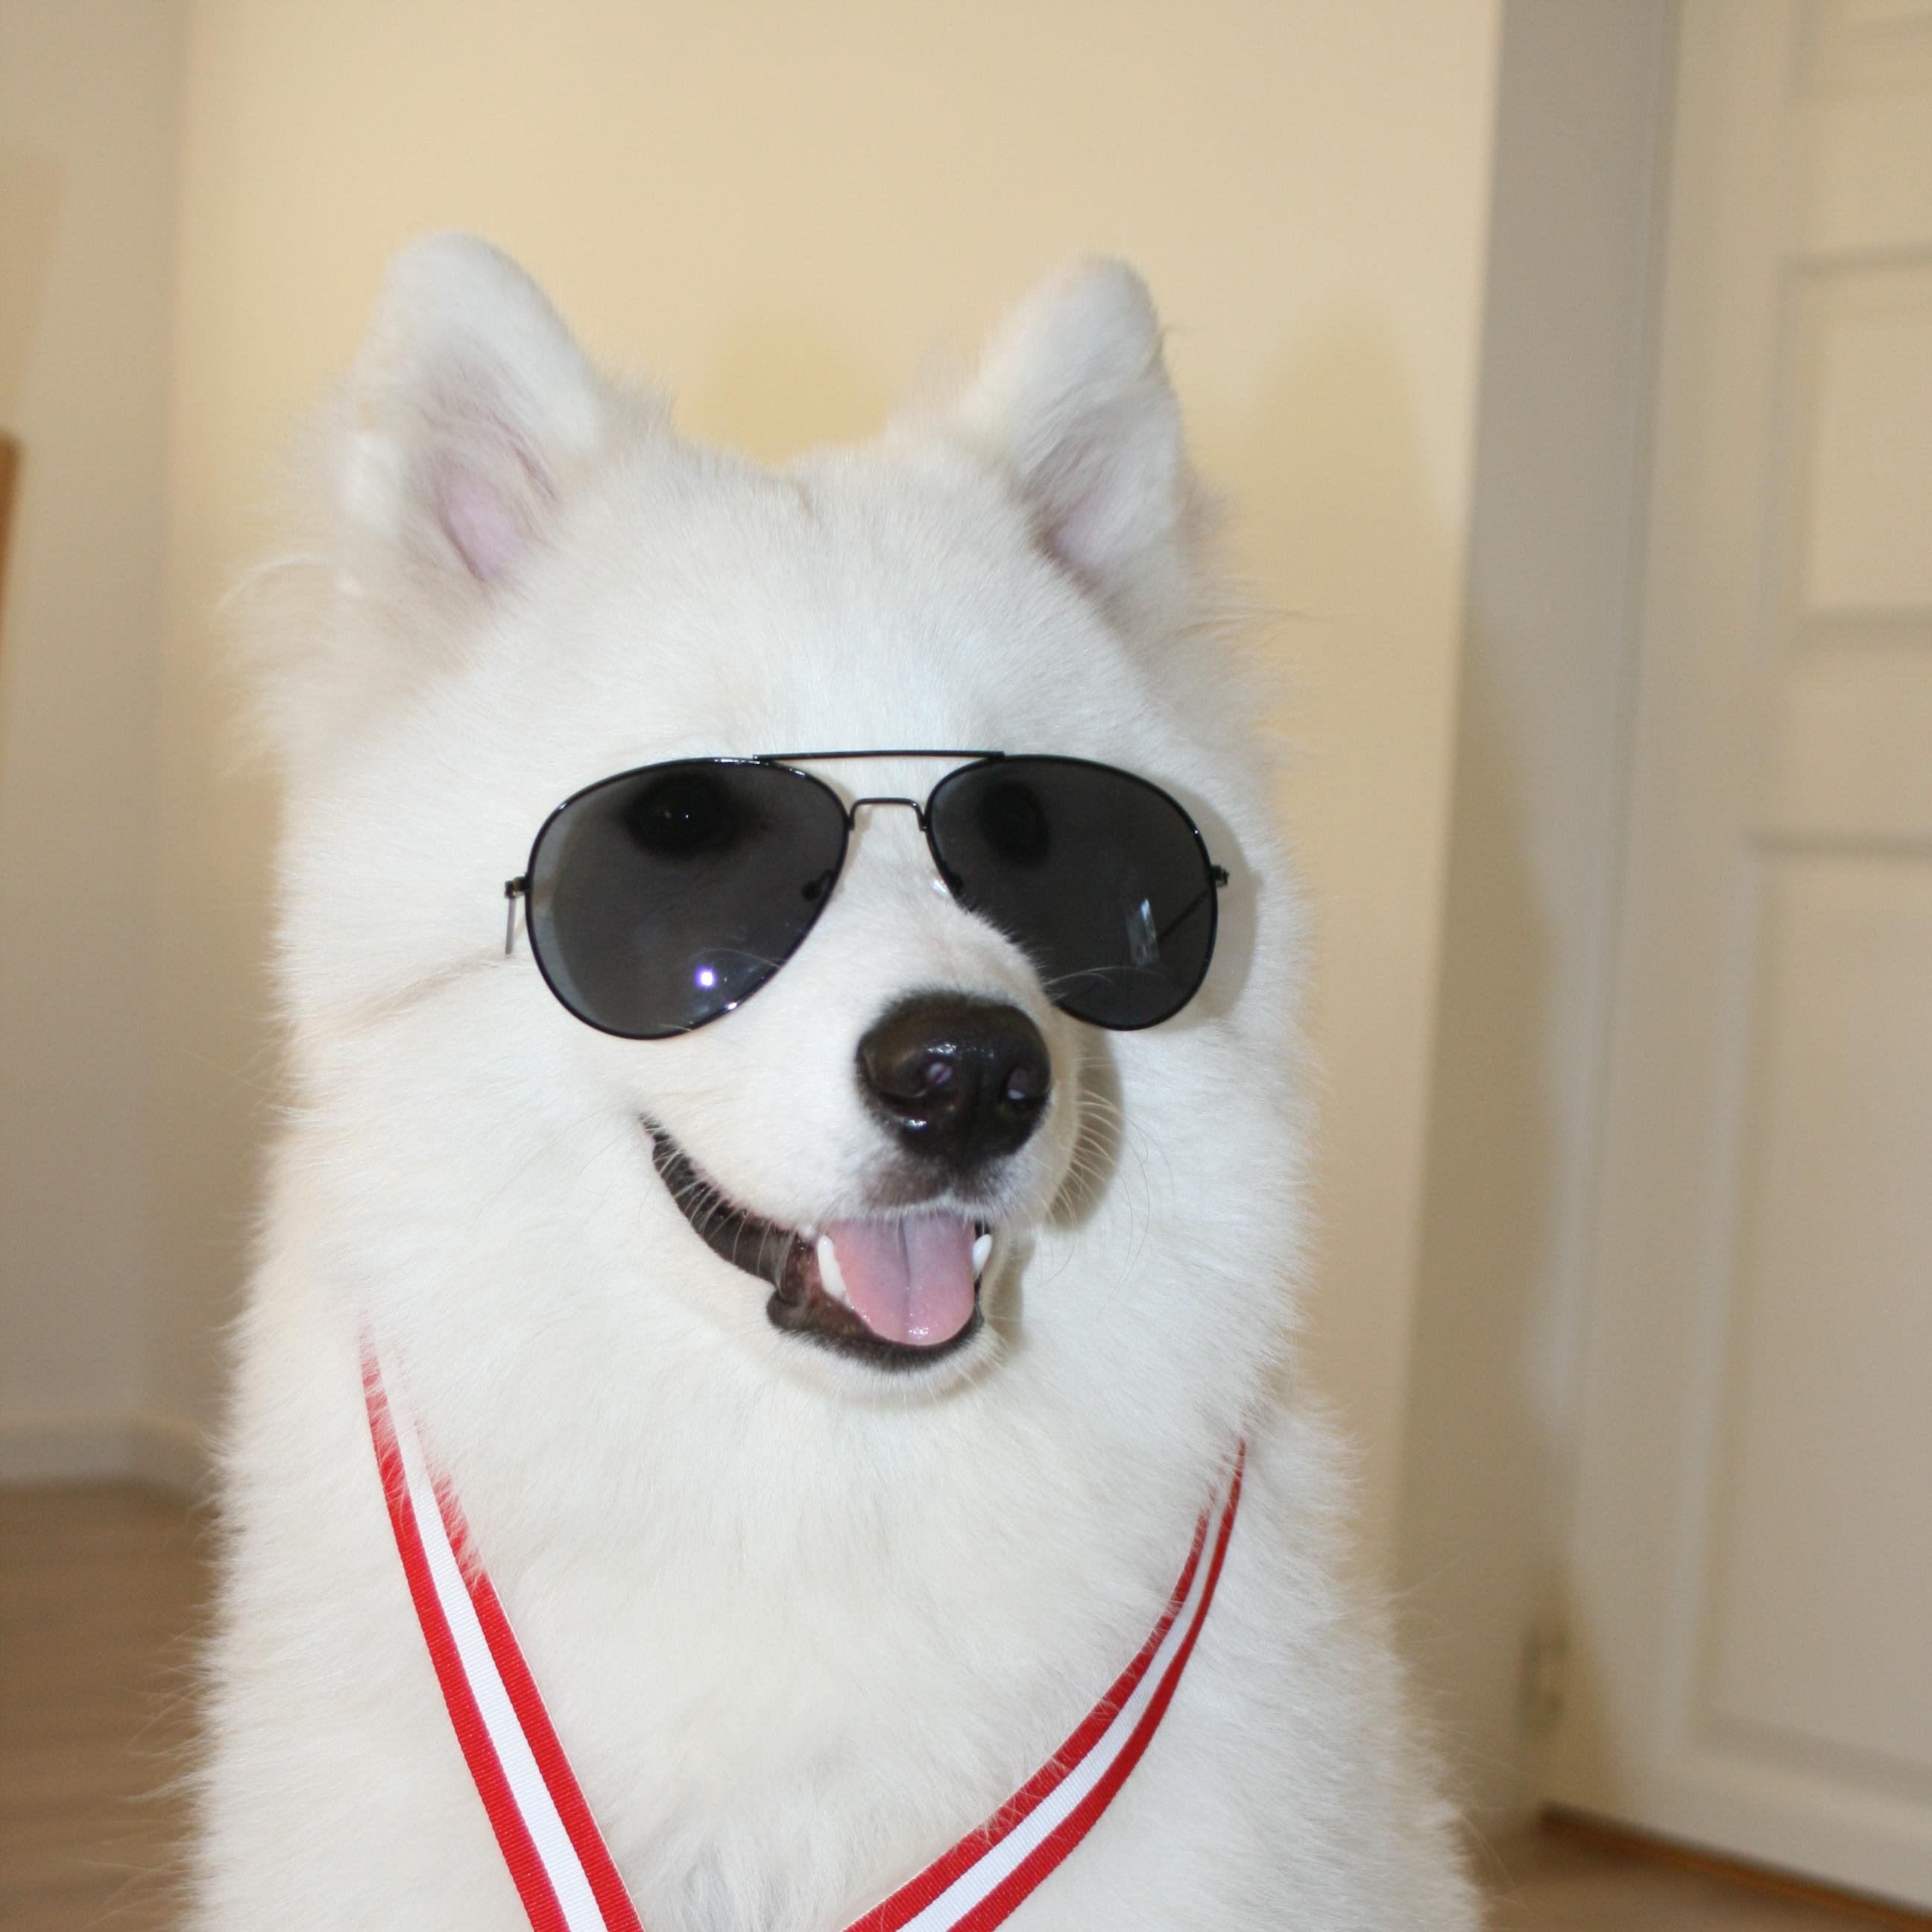 http://t.co/L0JNkxNXnv is done by Samoyed lovers and owners!Here you can find different kind of information from experienced people! All to our wonderful dogs!